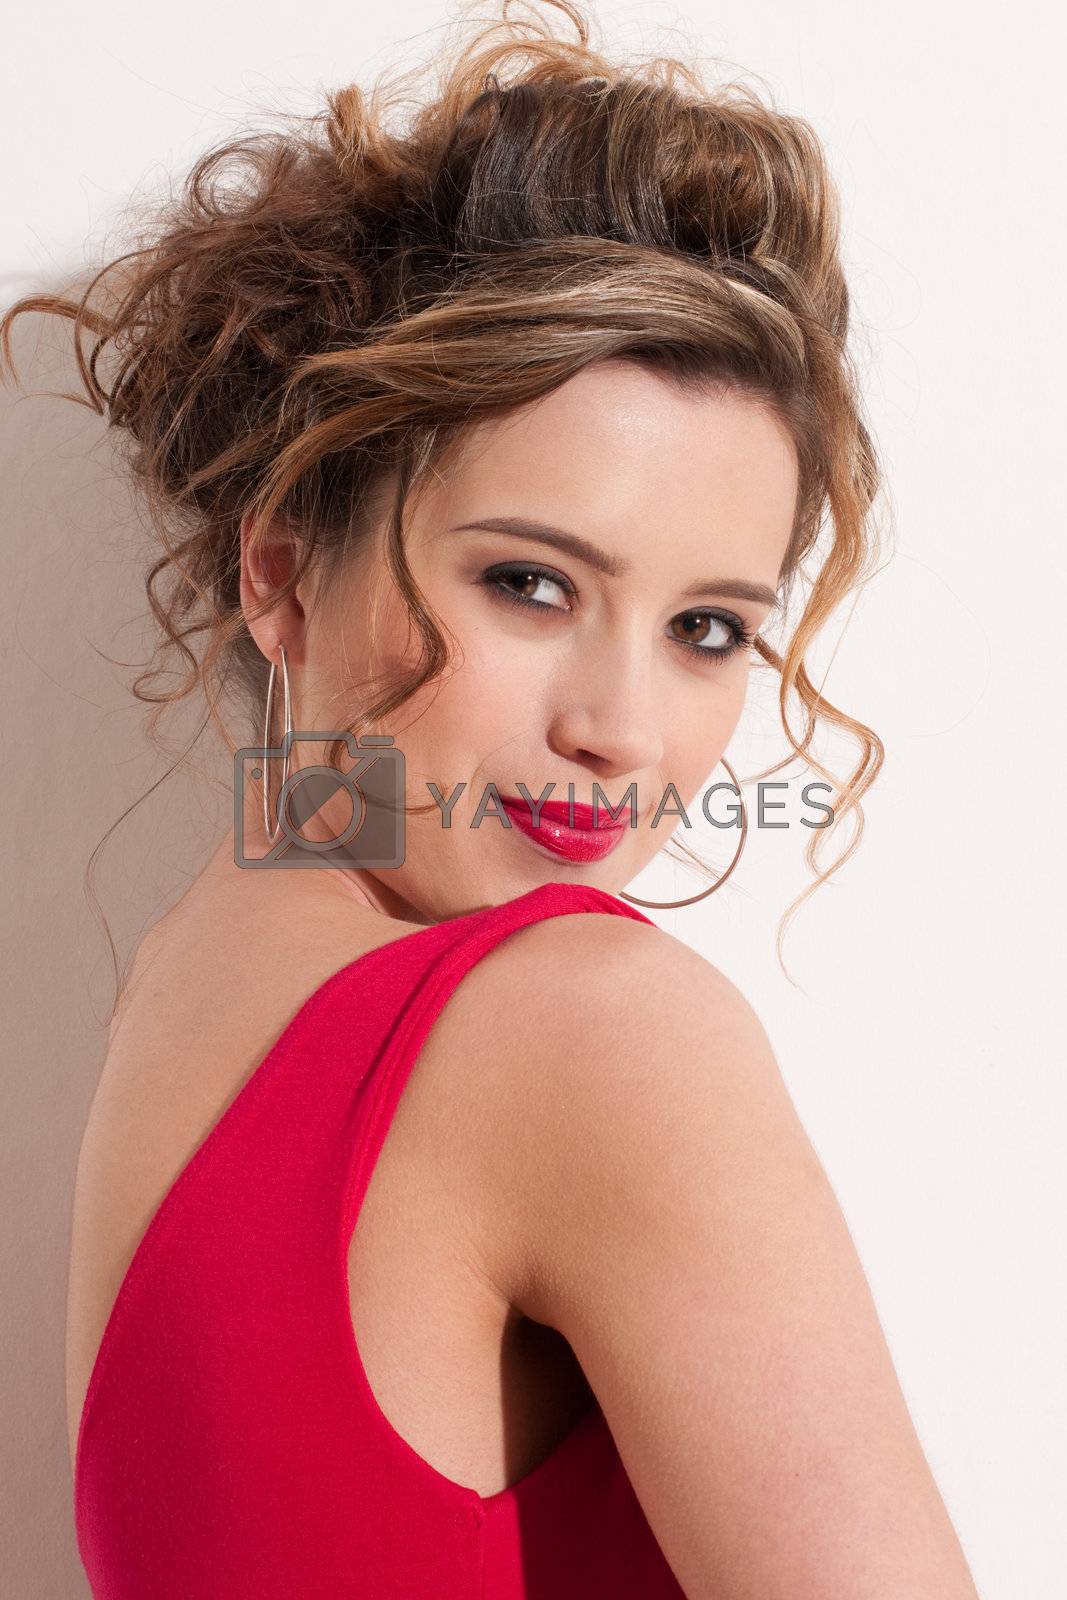 Royalty free image of Close-up of beautiful girl with red vogue maekeup by markin